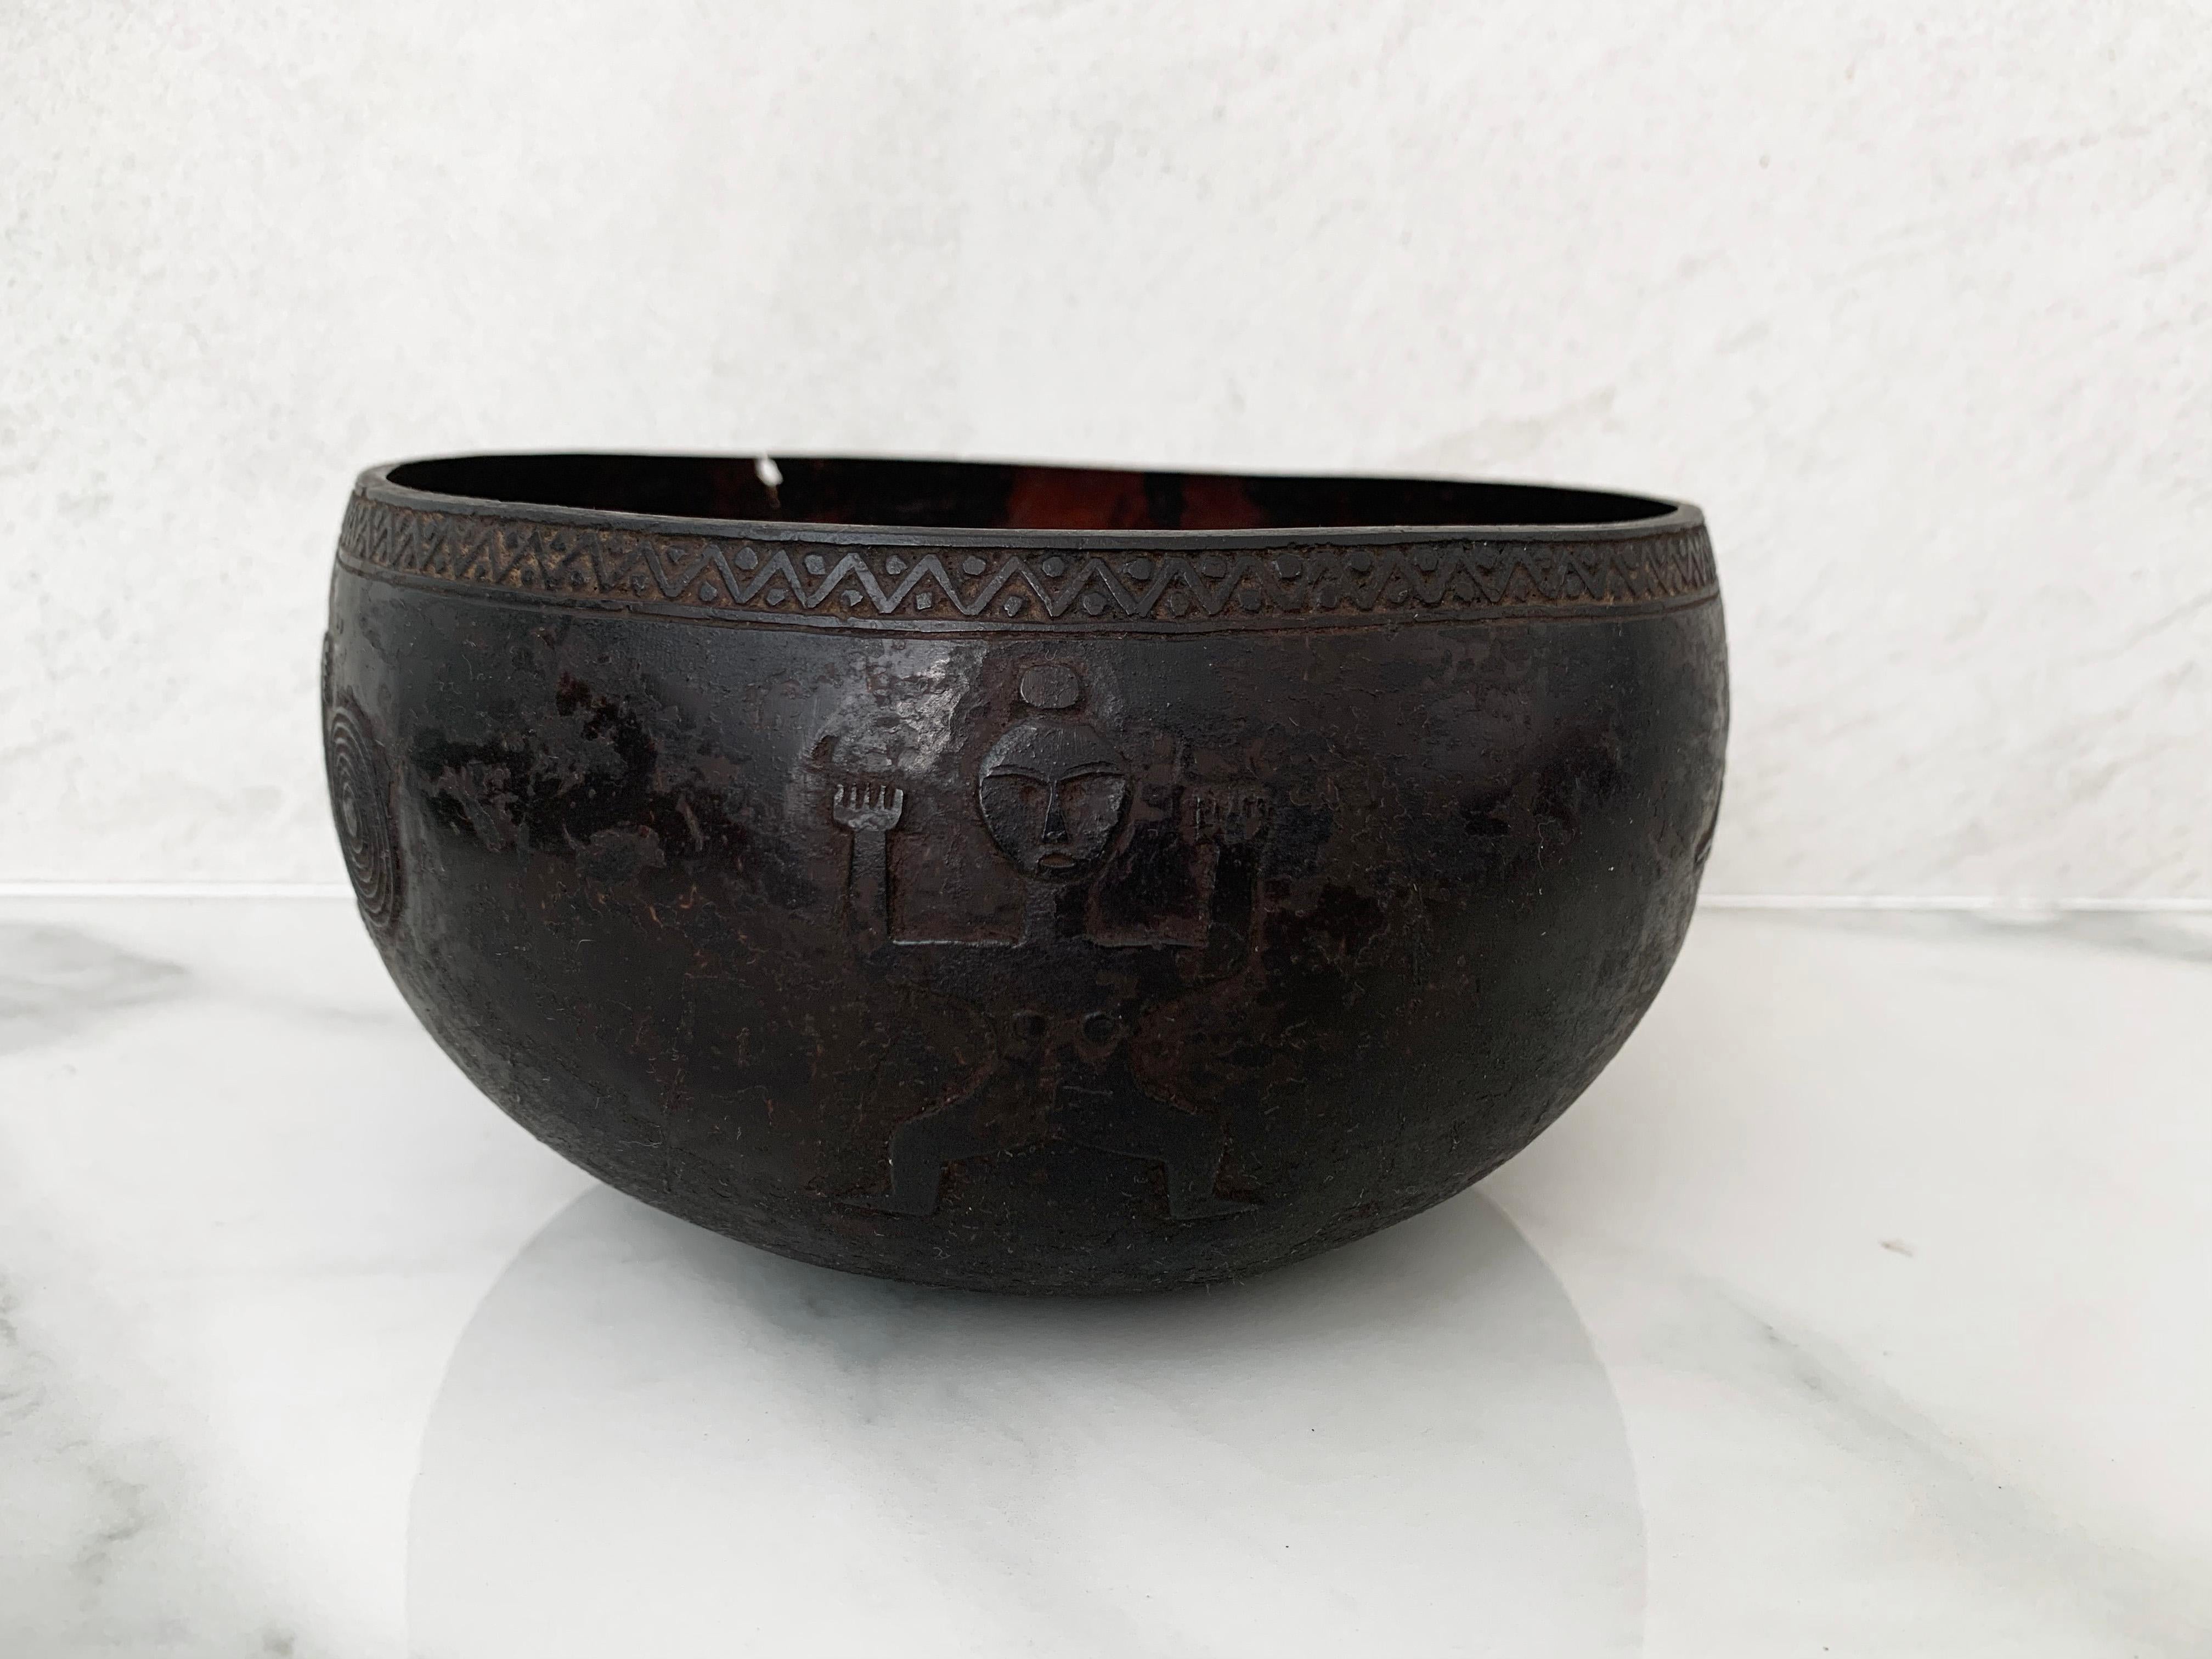 Indonesian Coconut Shell Engraved Tribal Bowl from Nias, Mentawai Islands, Indonesia